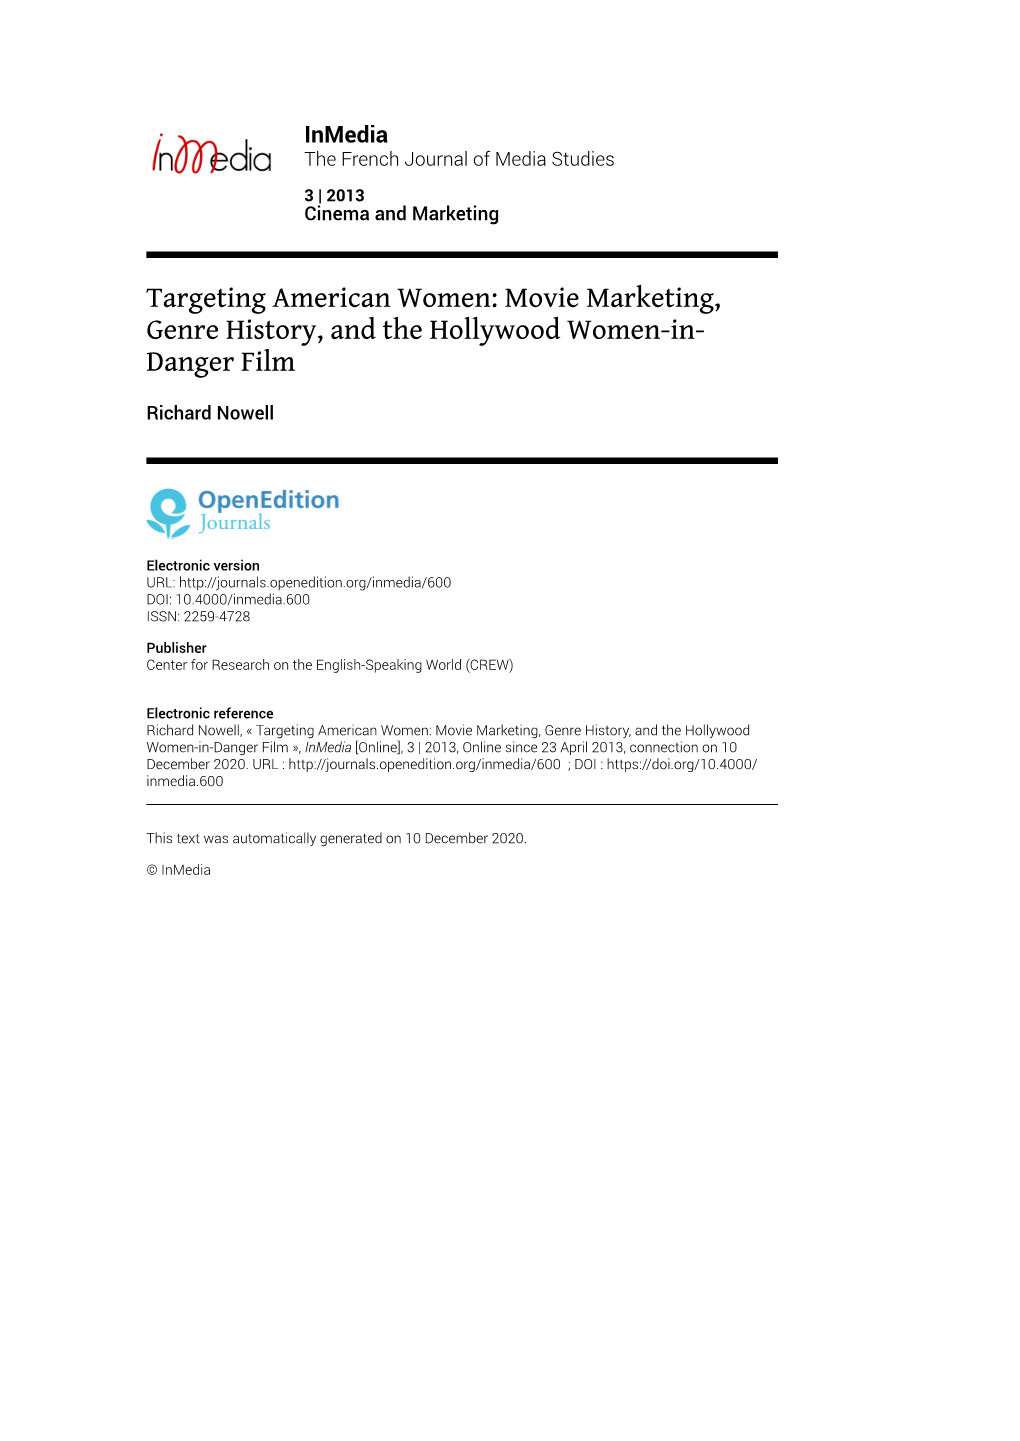 Inmedia, 3 | 2013 Targeting American Women: Movie Marketing, Genre History, and the Hollywood W